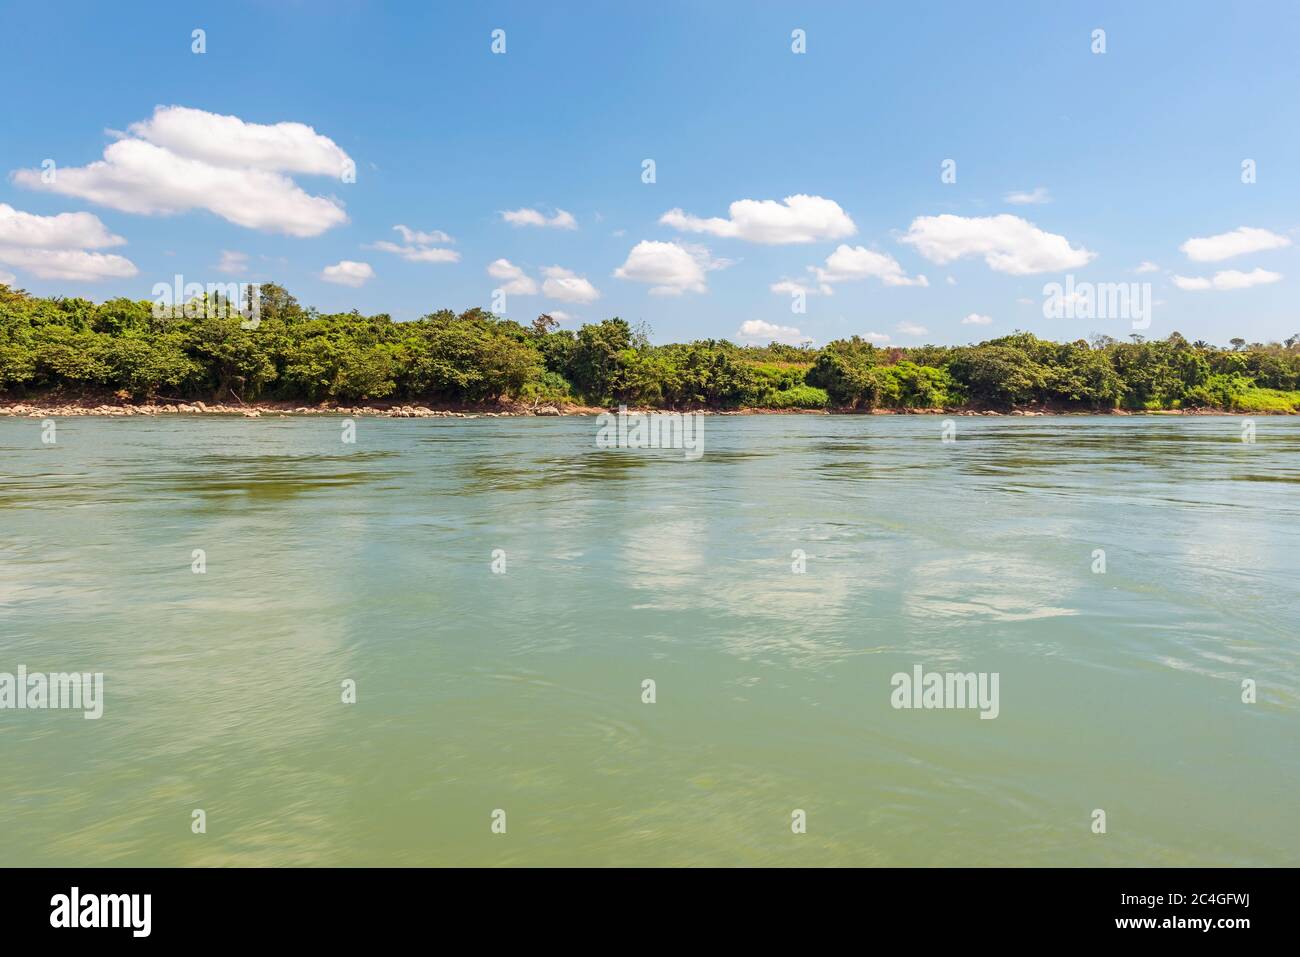 Landscape of the Usumacinta river, the international geographic border between Mexico and Guatemala. Stock Photo